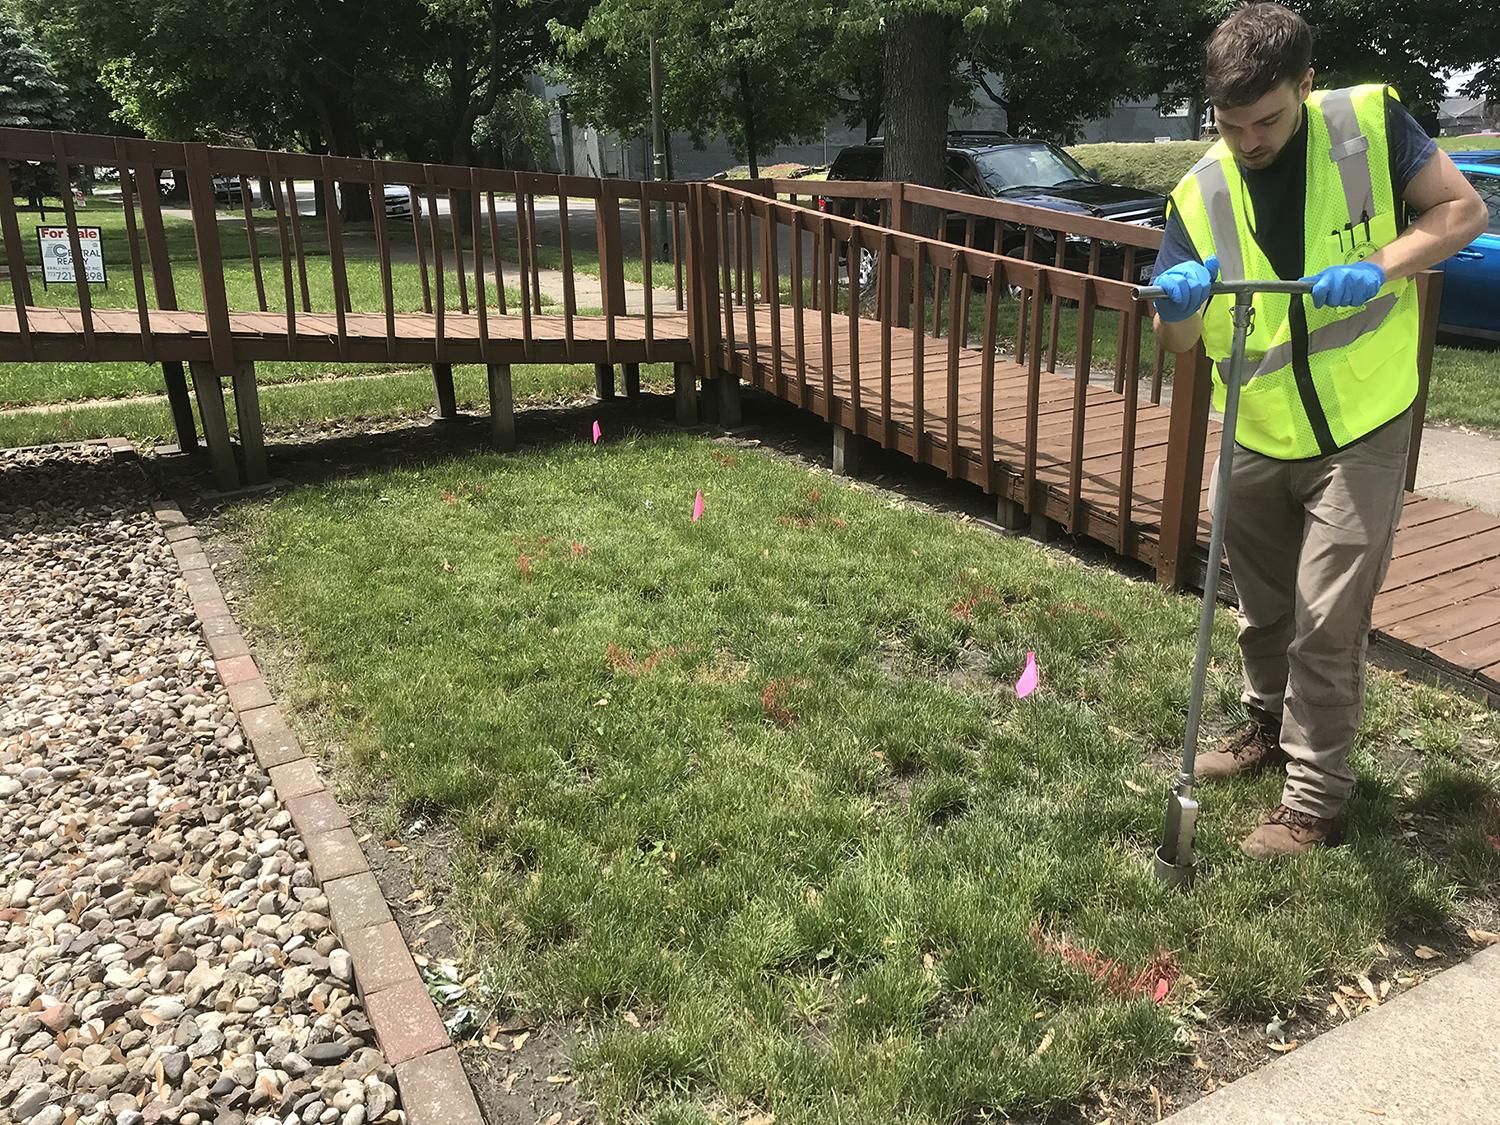 EPA workers began sampling residential yards near S.H. Bell last year to measure levels of manganese, lead and other heavy metals in the soil. (Courtesy U.S. Environmental Protection Agency)